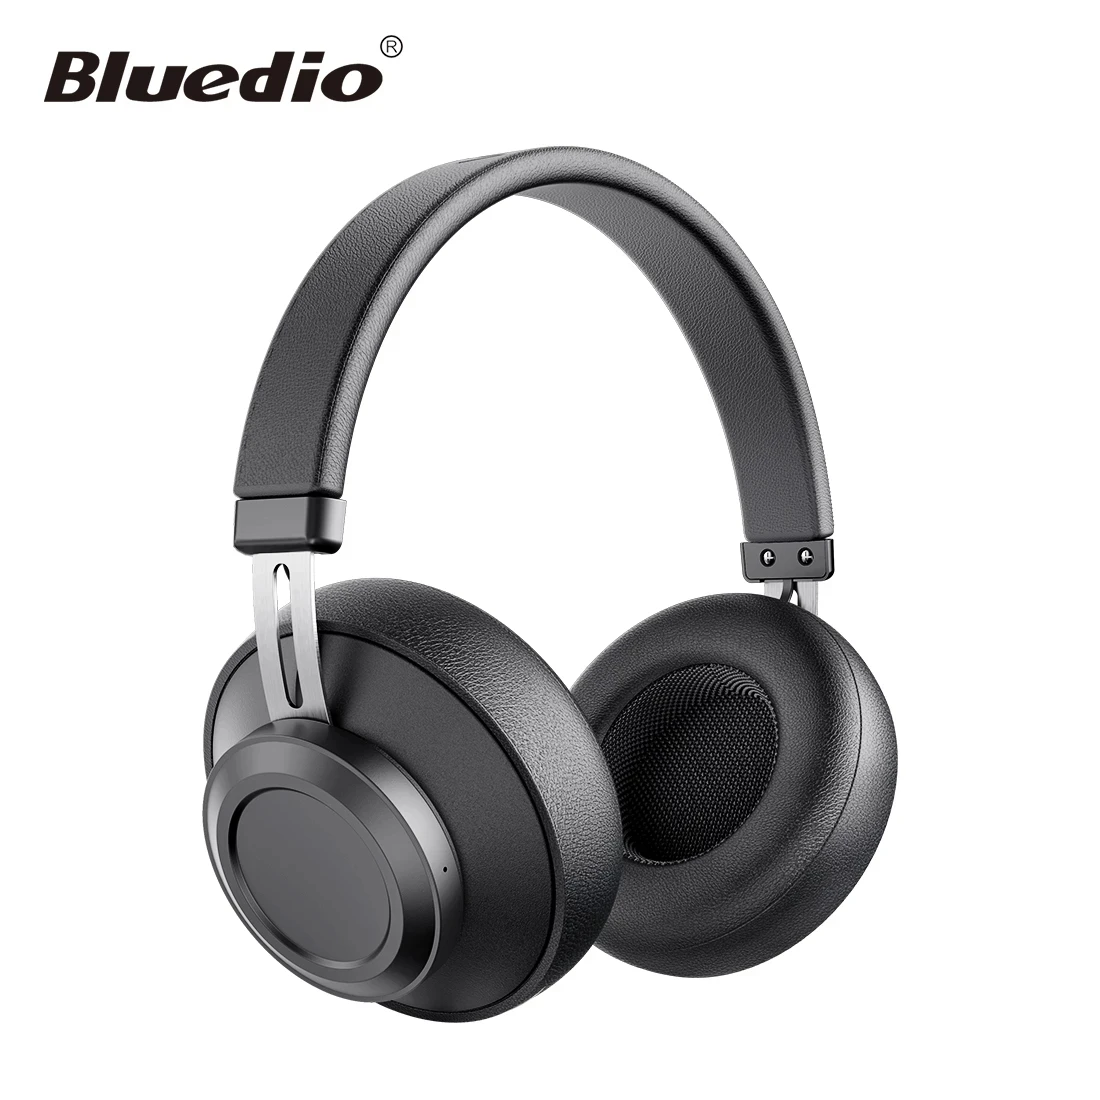 

Bluedio BT5 BT5.0 headphone HiFi Stereo bass wireless headset Noise Reduction Long Endurance with mic for PC and video game